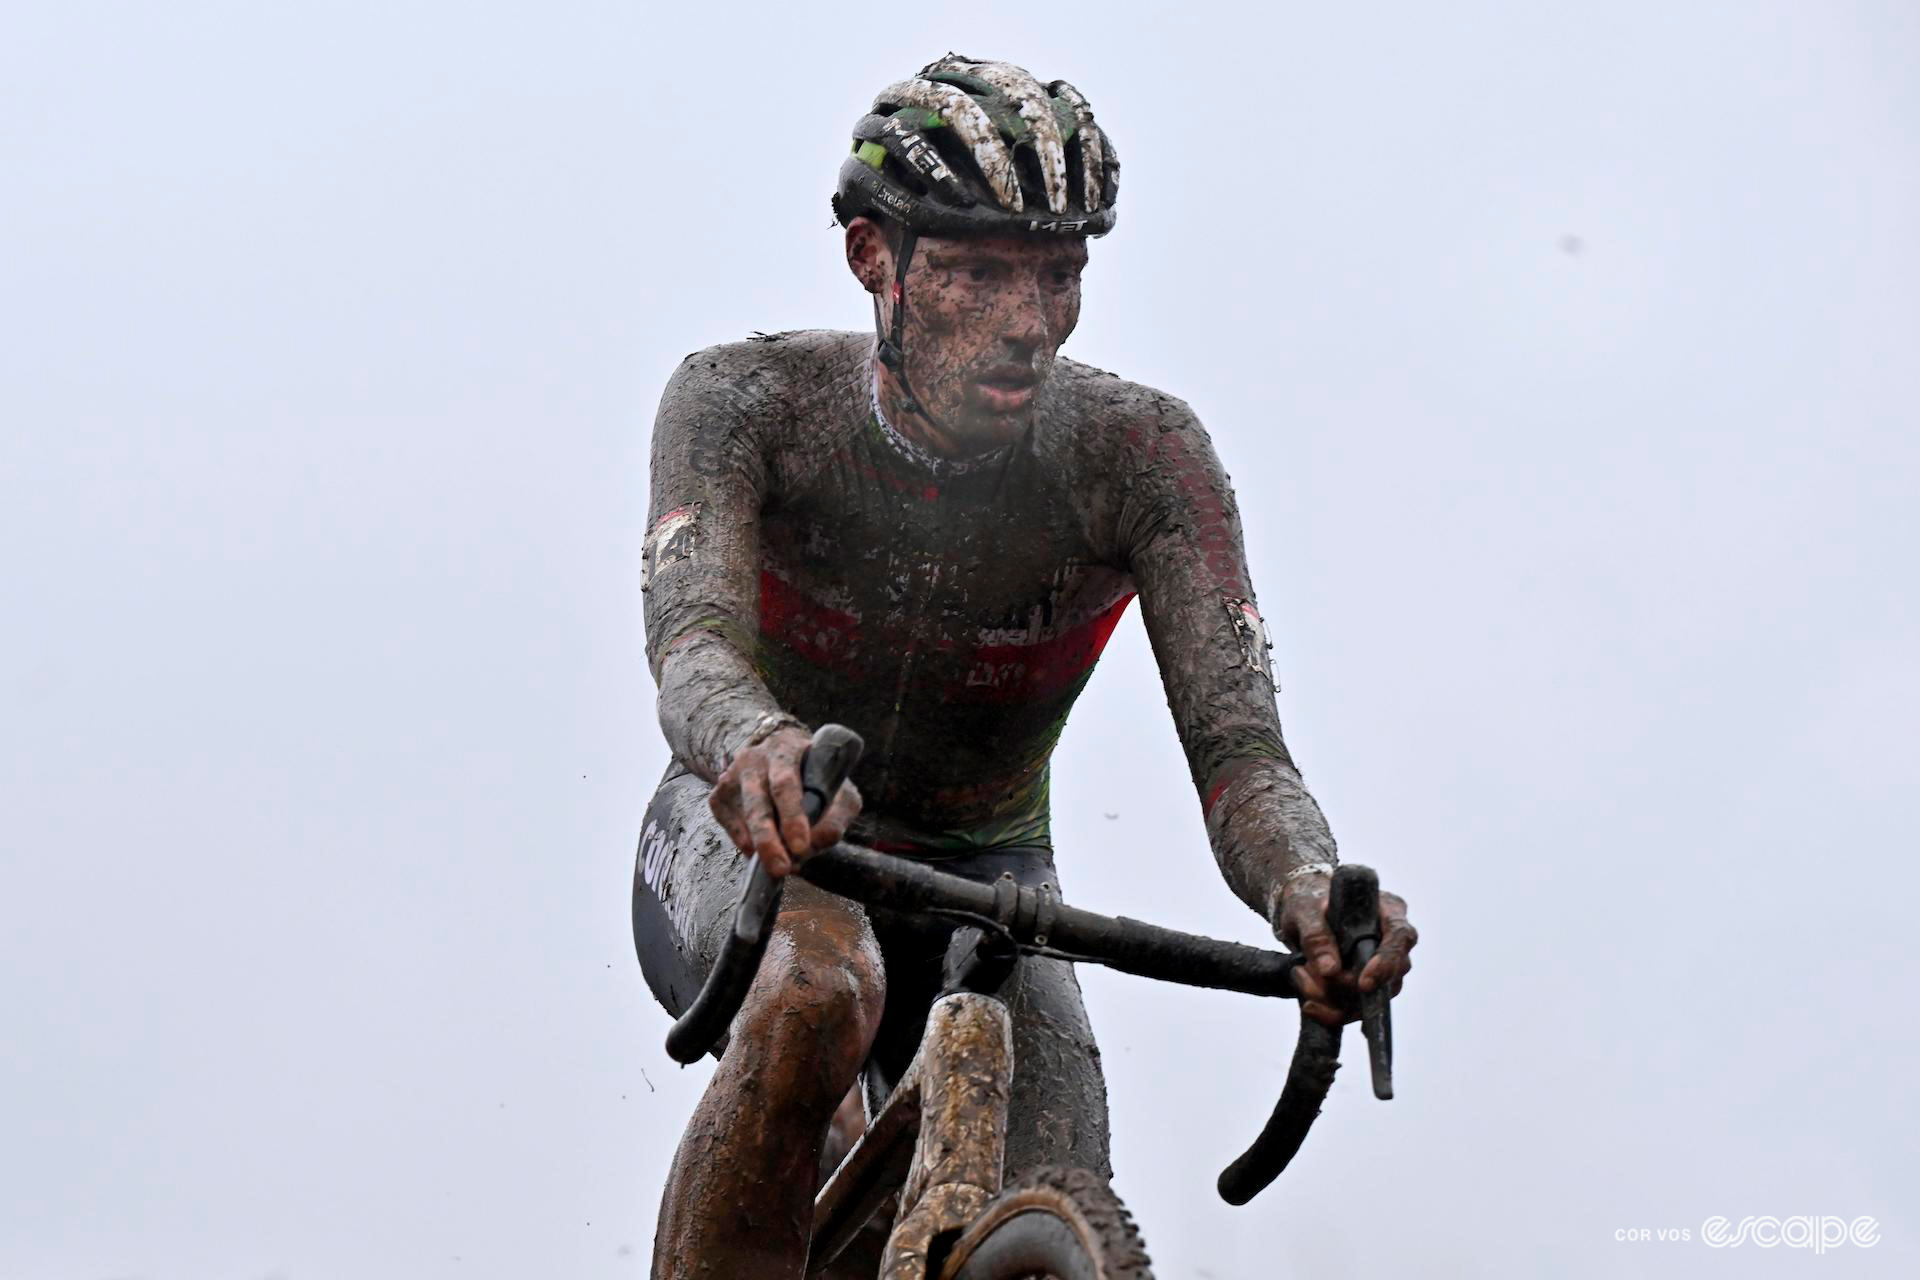 Covered head to toe in mud, Joran Wyseure of Crelan-Corendon looks focused and/or exhausted during CX World Cup Dublin, a grey overcast sky overhead.